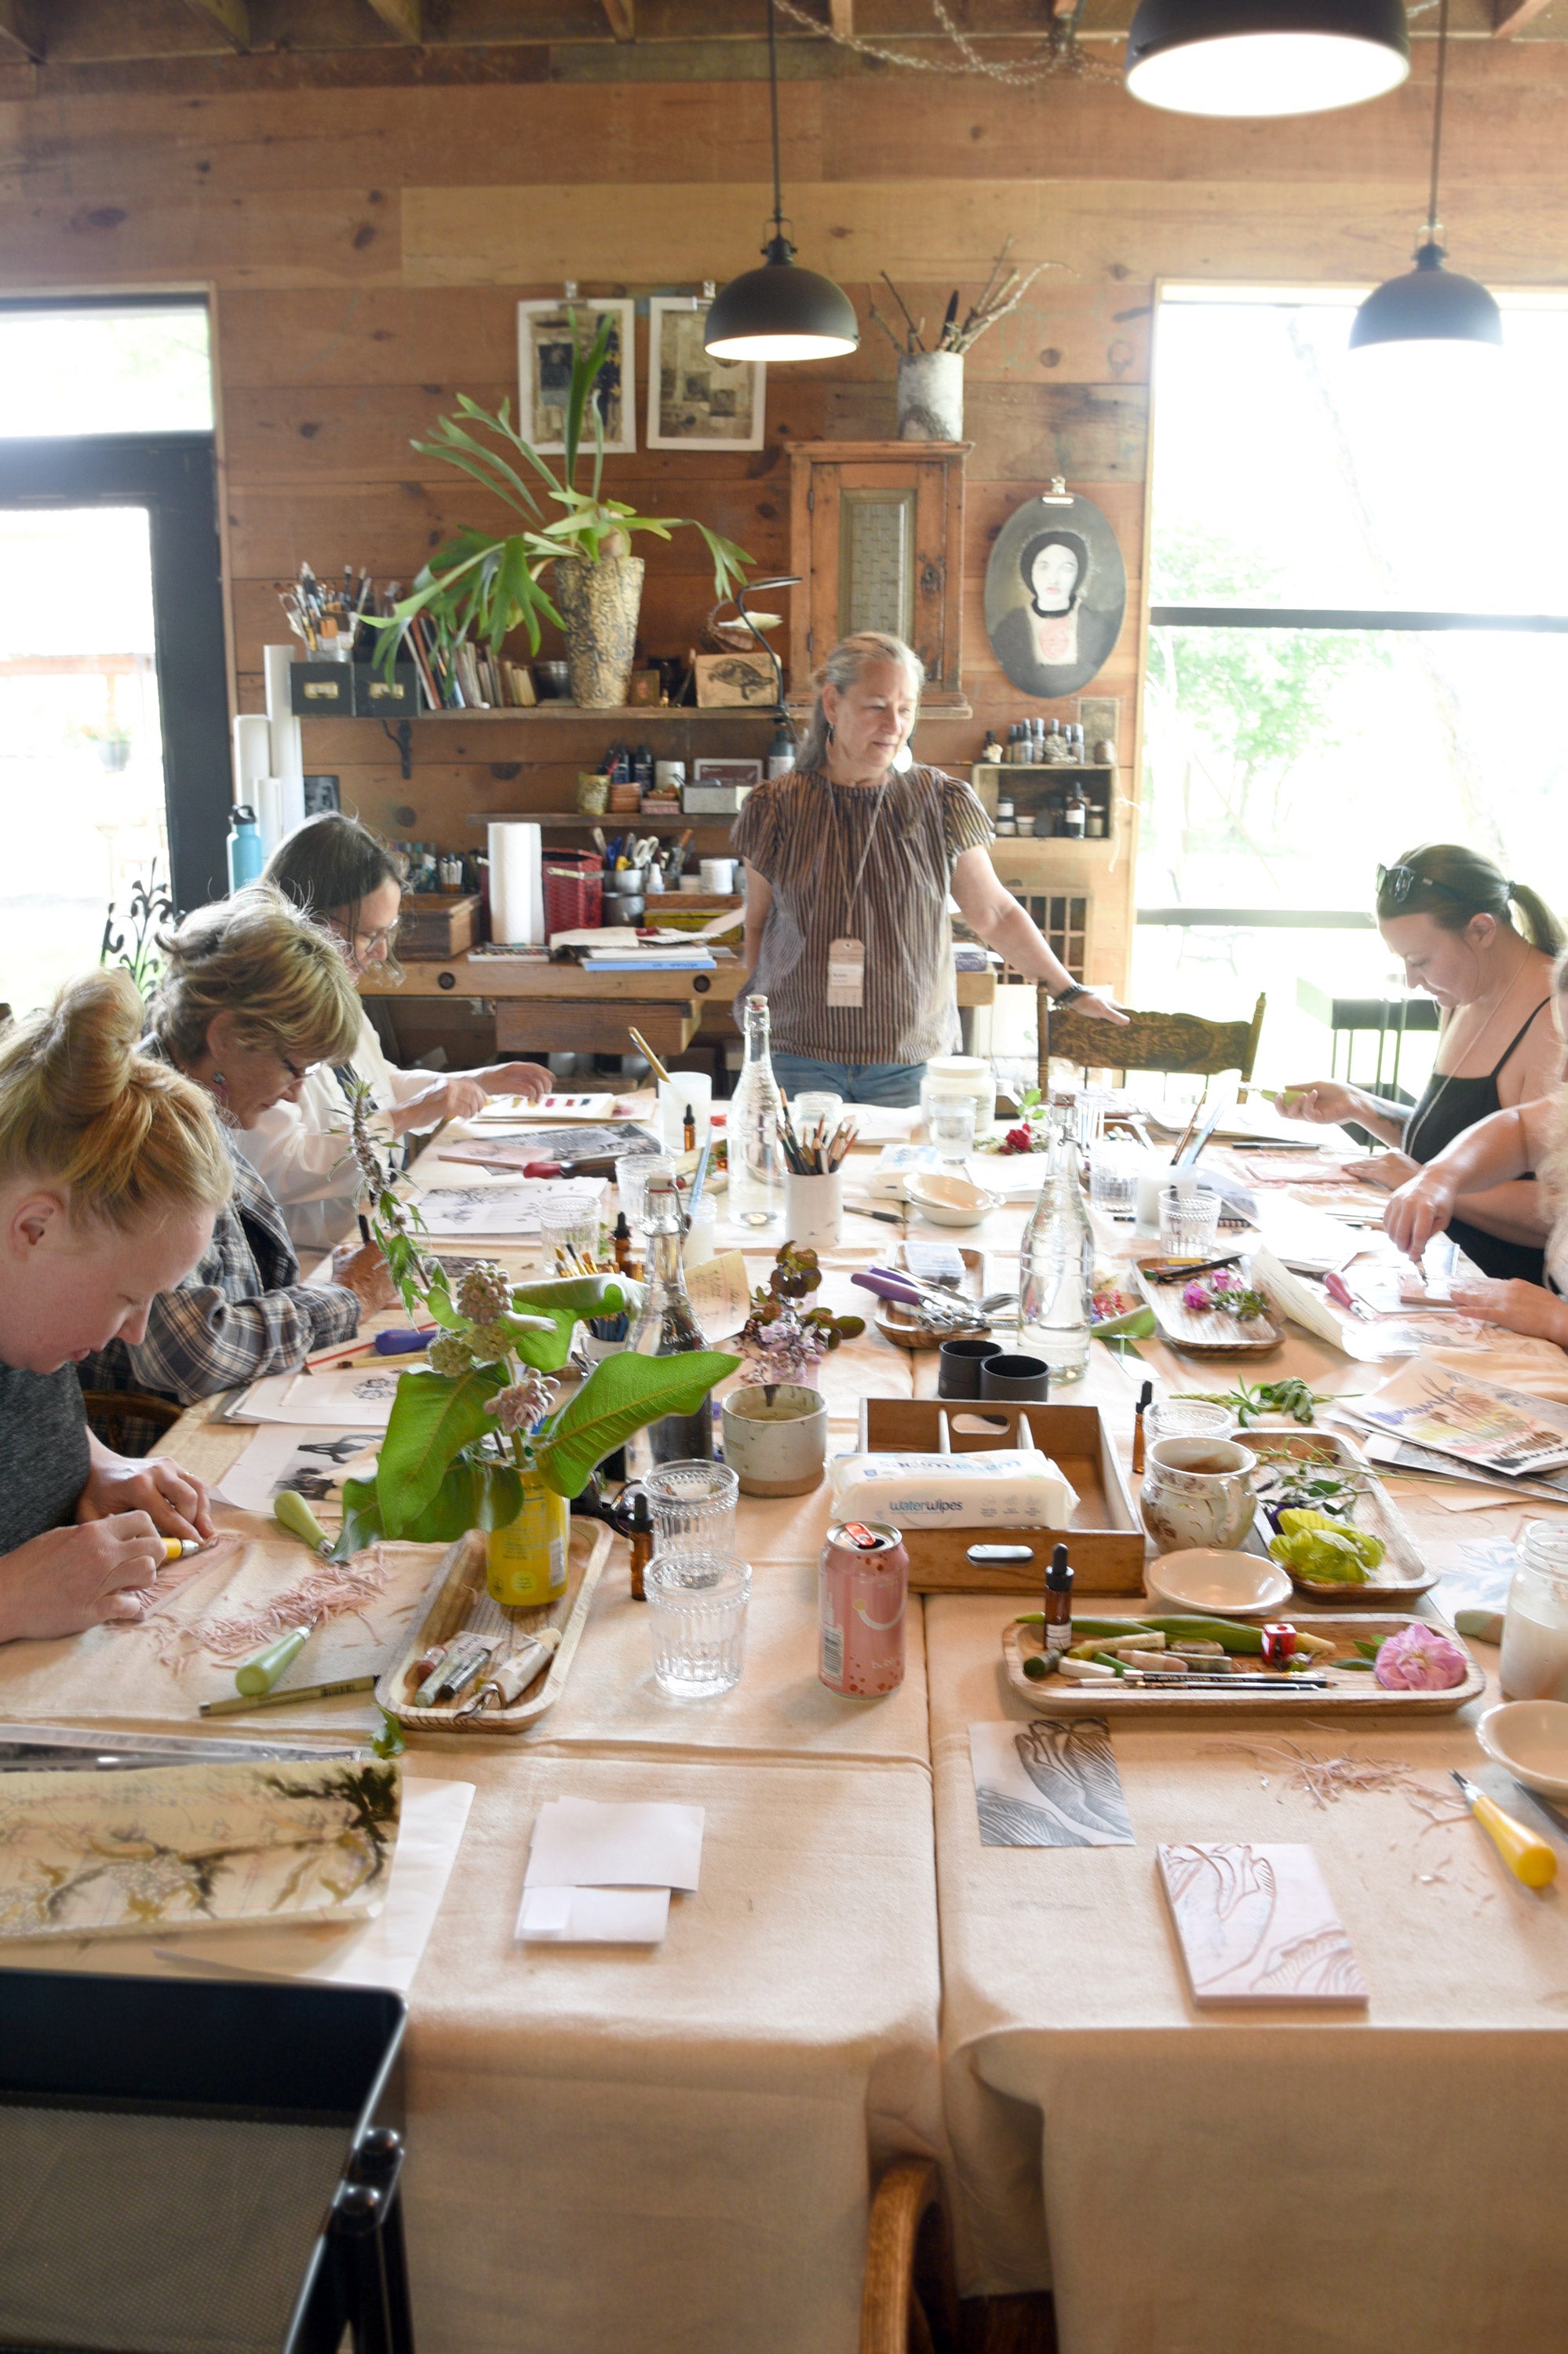 Artists at work painting and collaging in the Bee House art studio at Hunter Moon Homestead